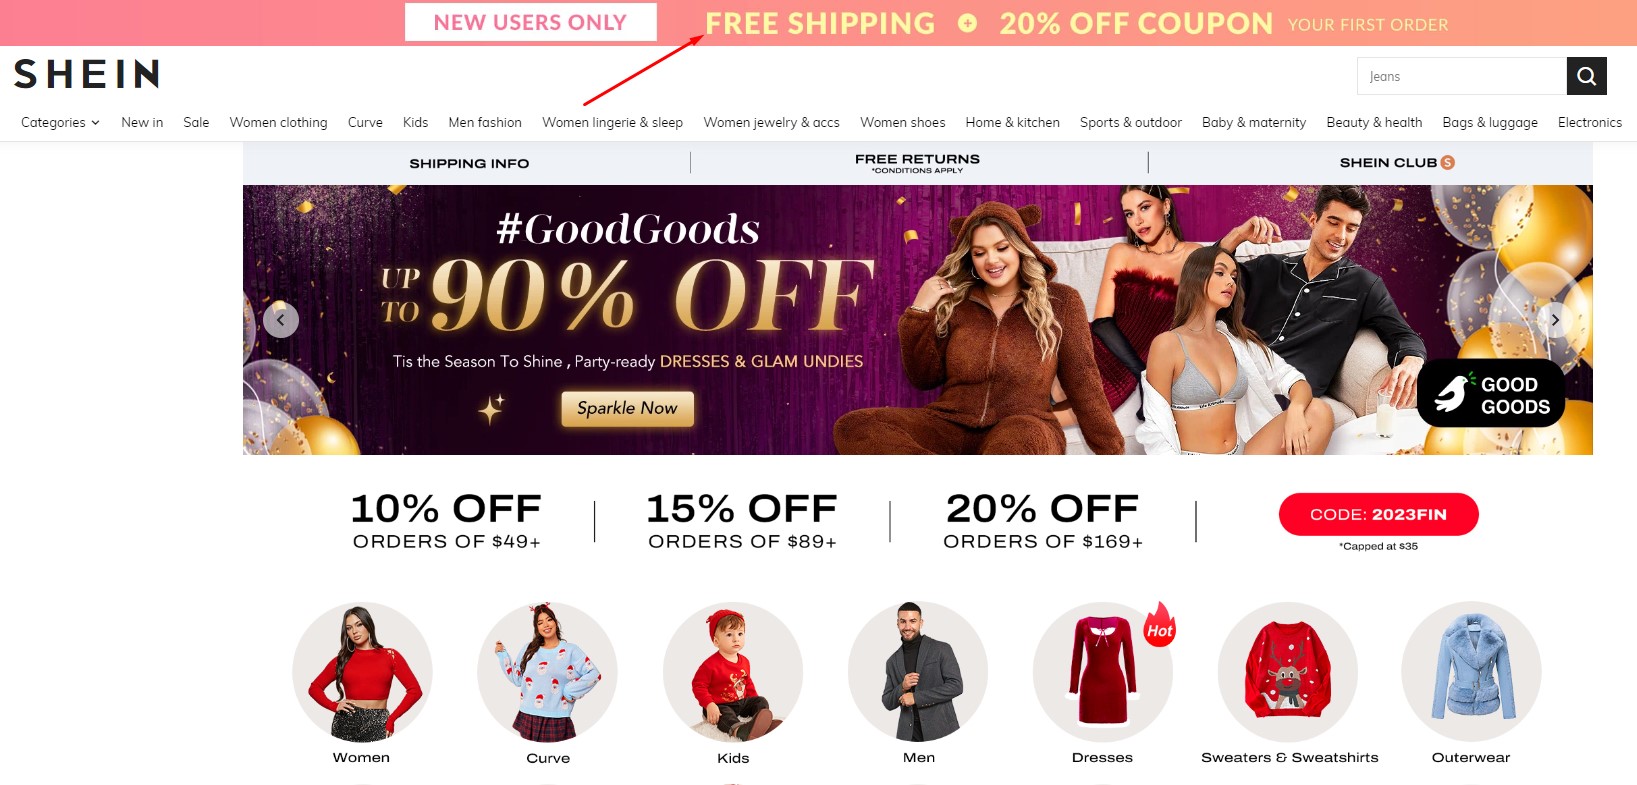 Shein free shipping and 20% off